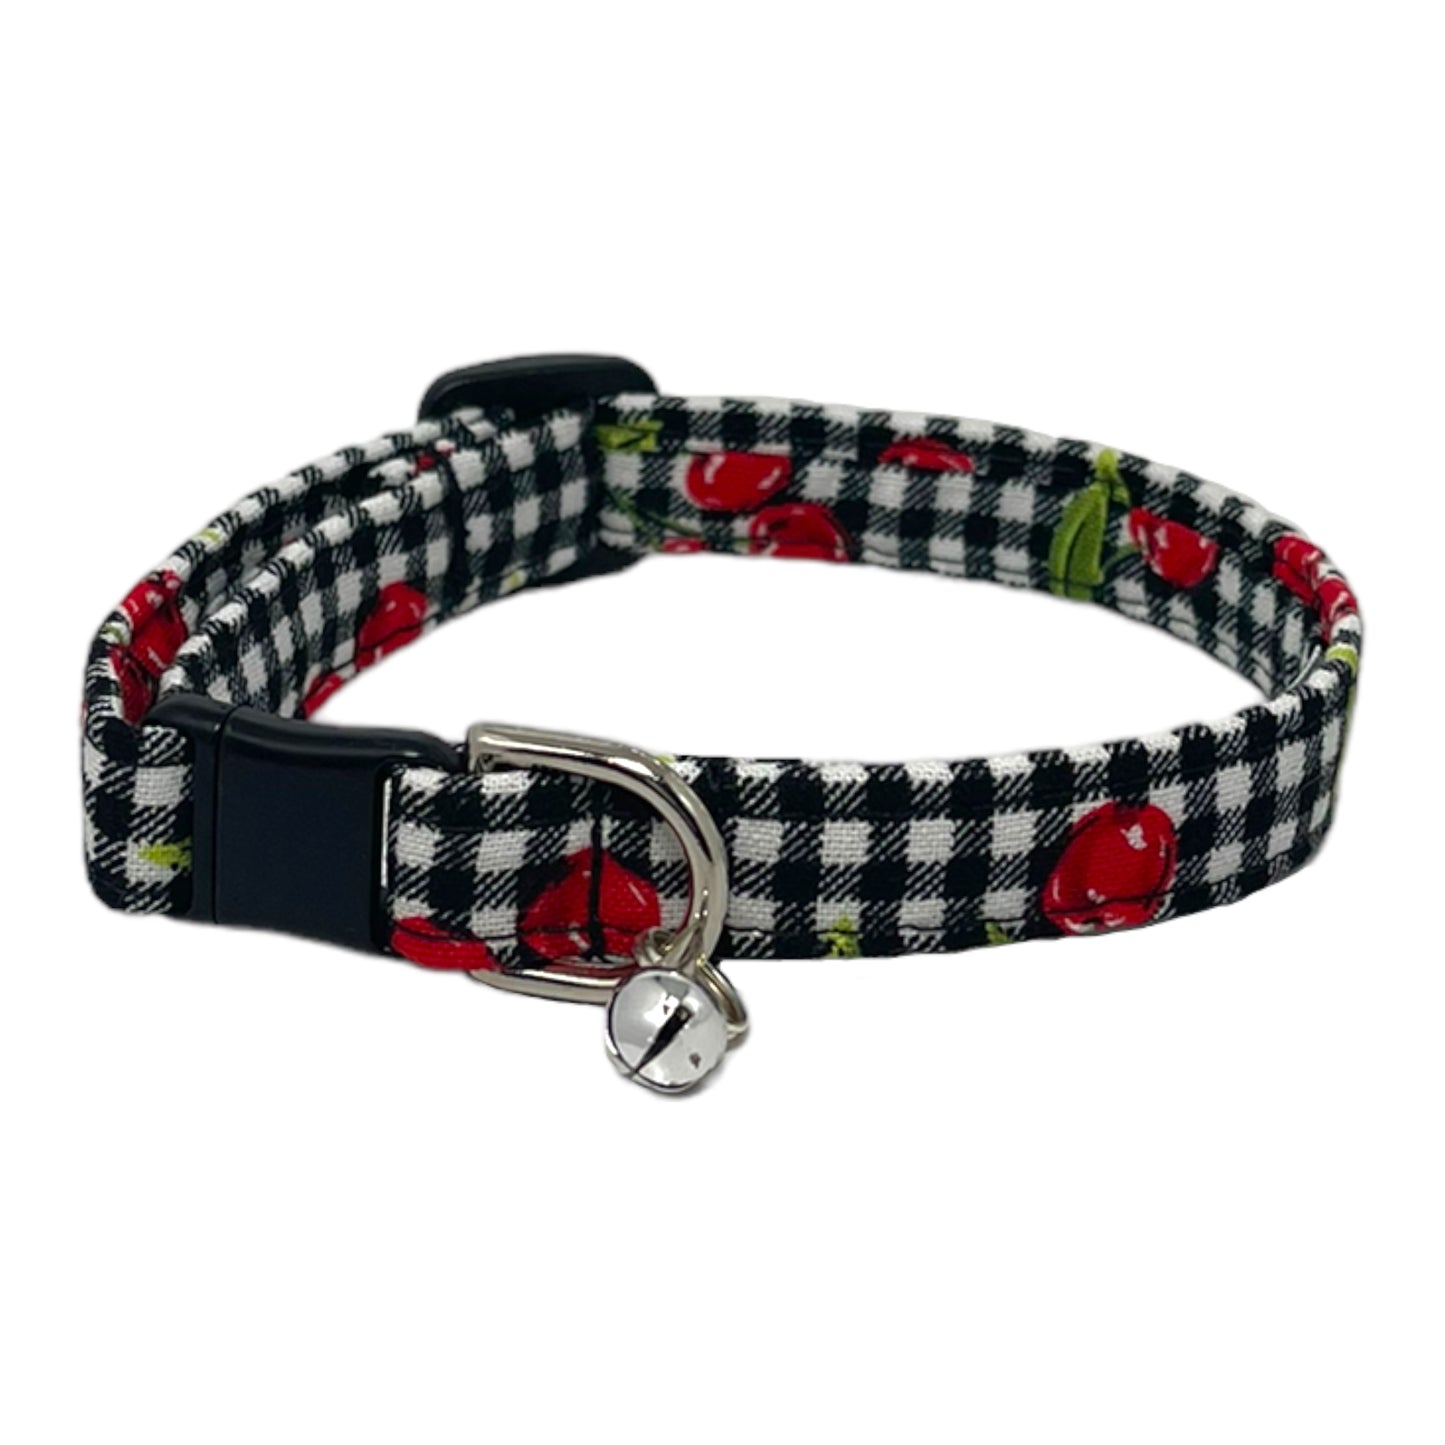 "Cherry Picnic” - Safety Release Cat Collar